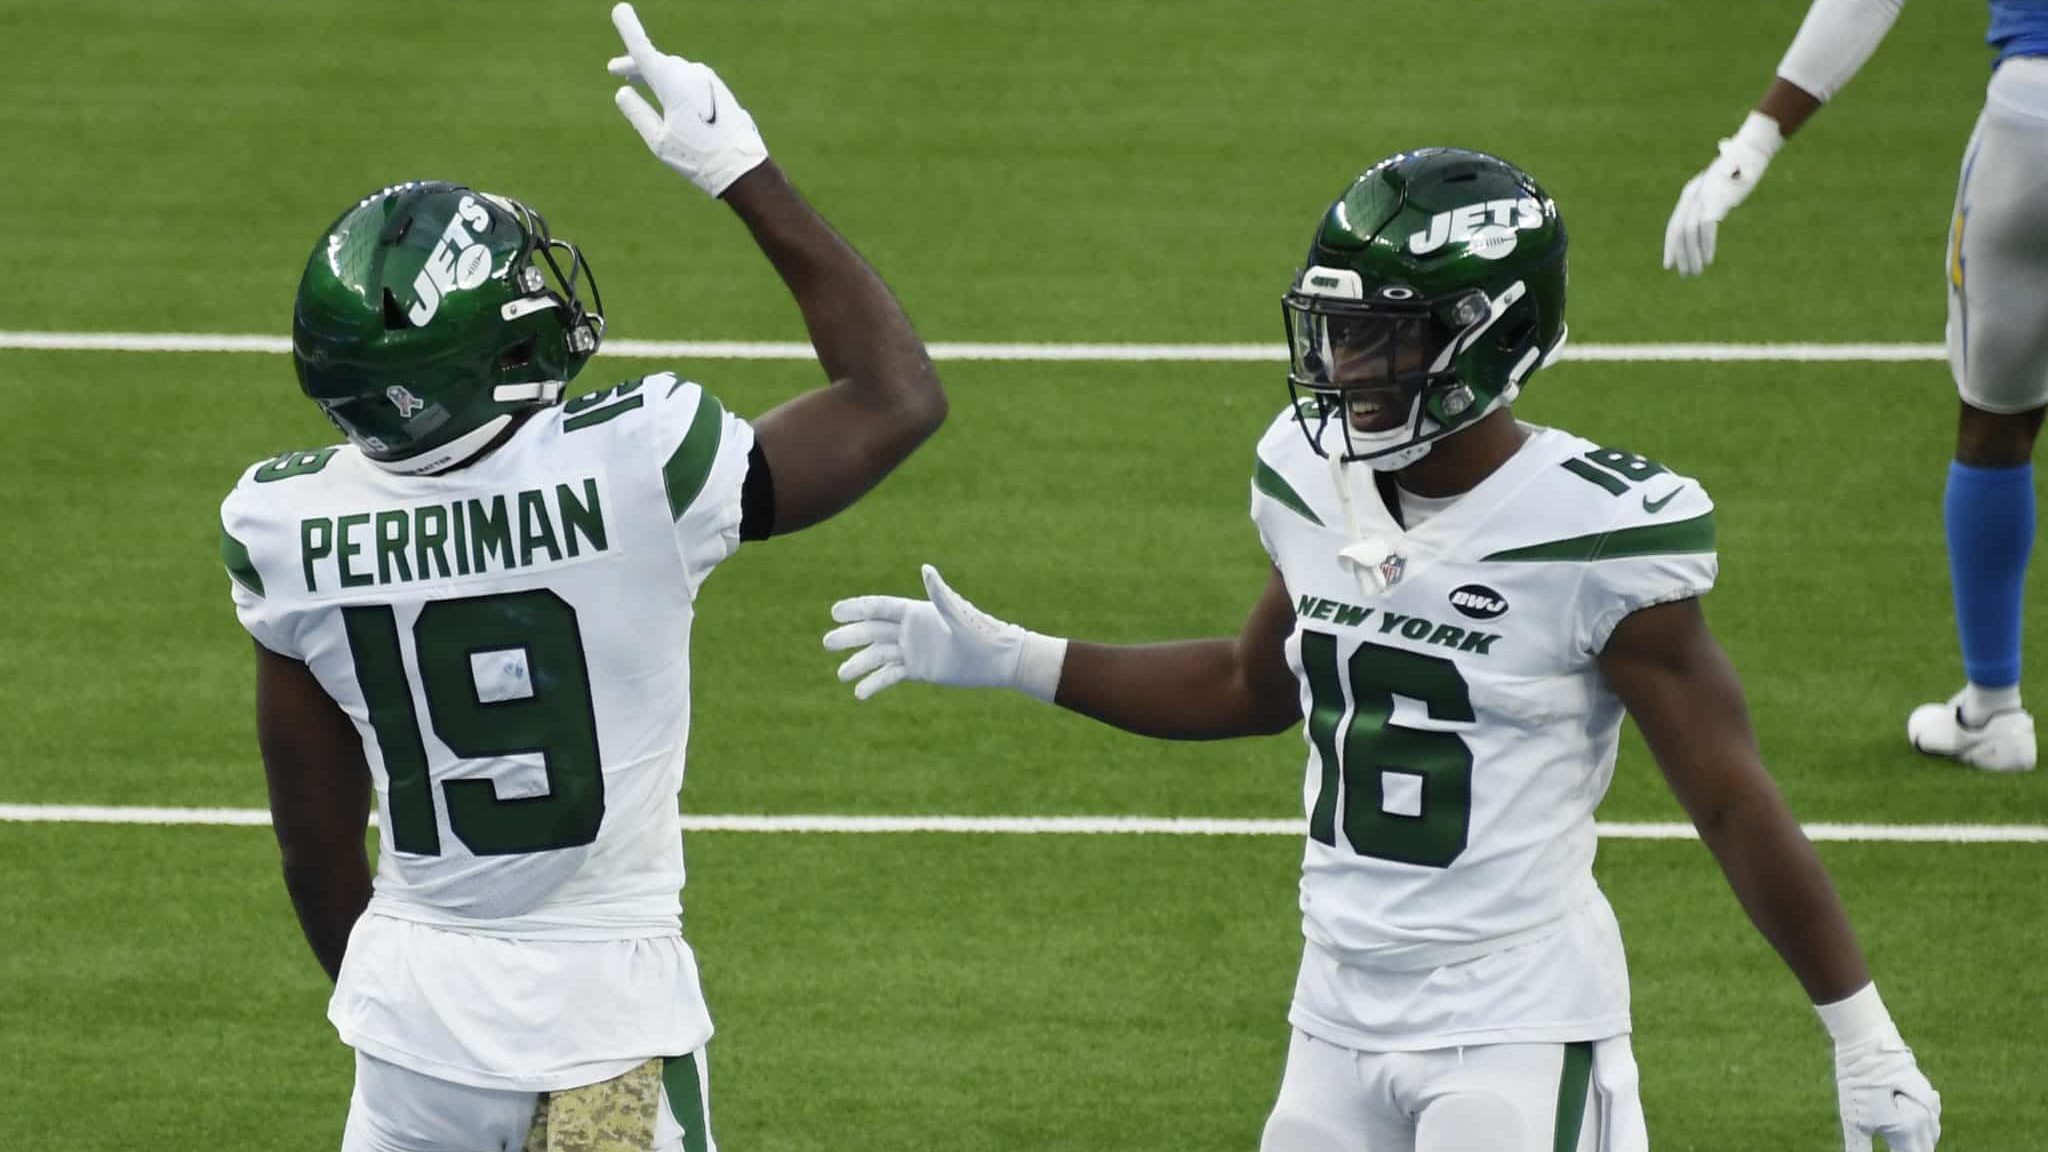 INGLEWOOD, CALIFORNIA - NOVEMBER 22: Jeff Smith #16 of the New York Jets celebrates with Breshad Perriman #19 after Perriman's touchdown during the second half against the Los Angeles Chargers at SoFi Stadium on November 22, 2020 in Inglewood, California.